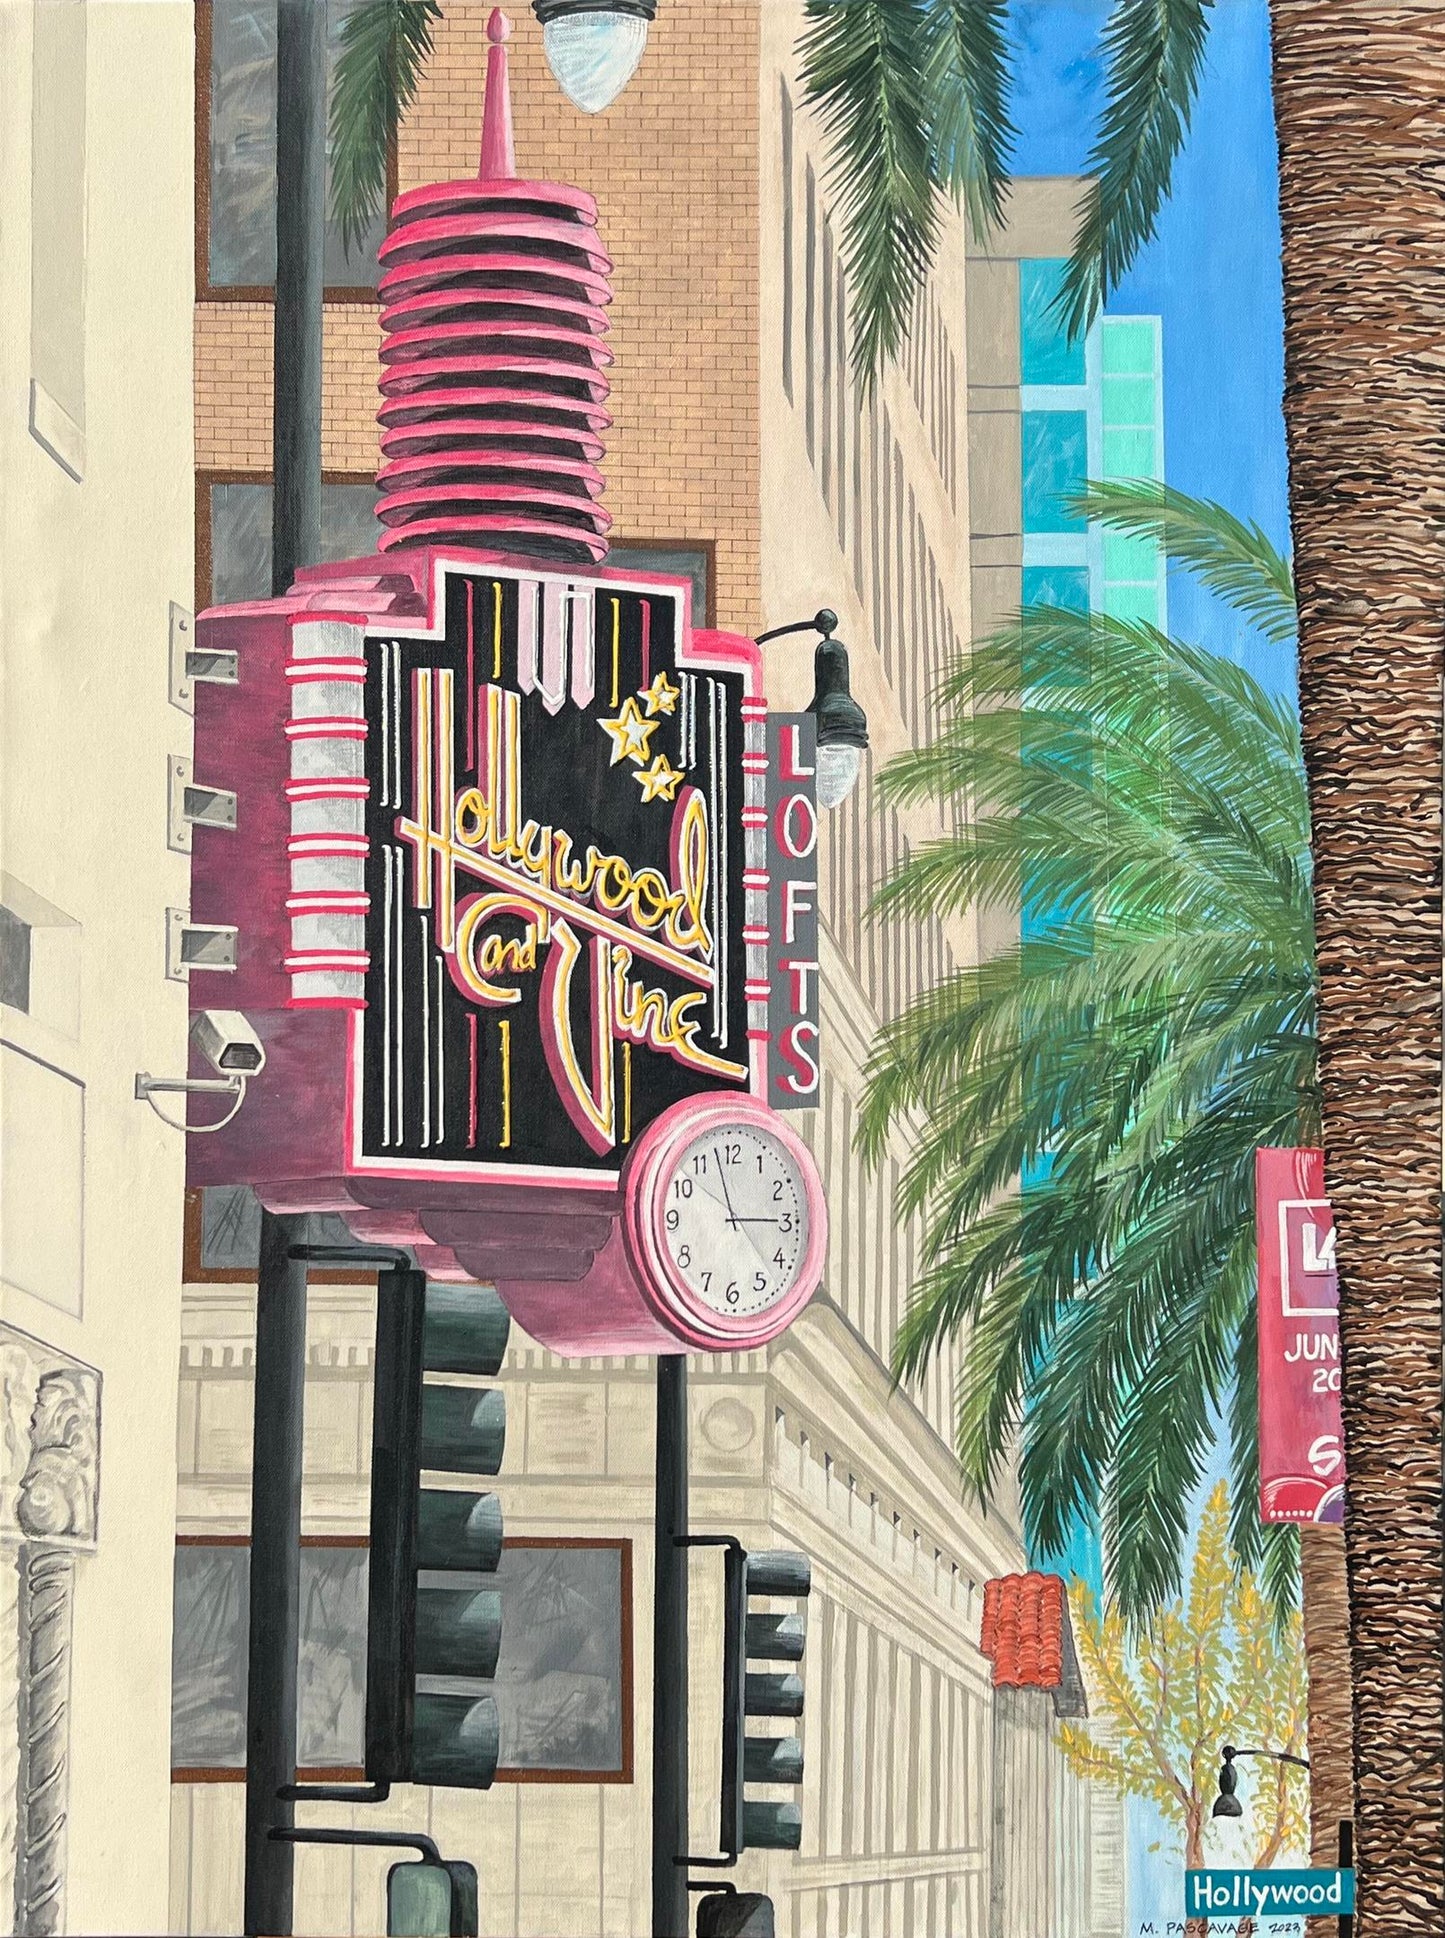 Hollywood and Vine (Michael Pascavage)